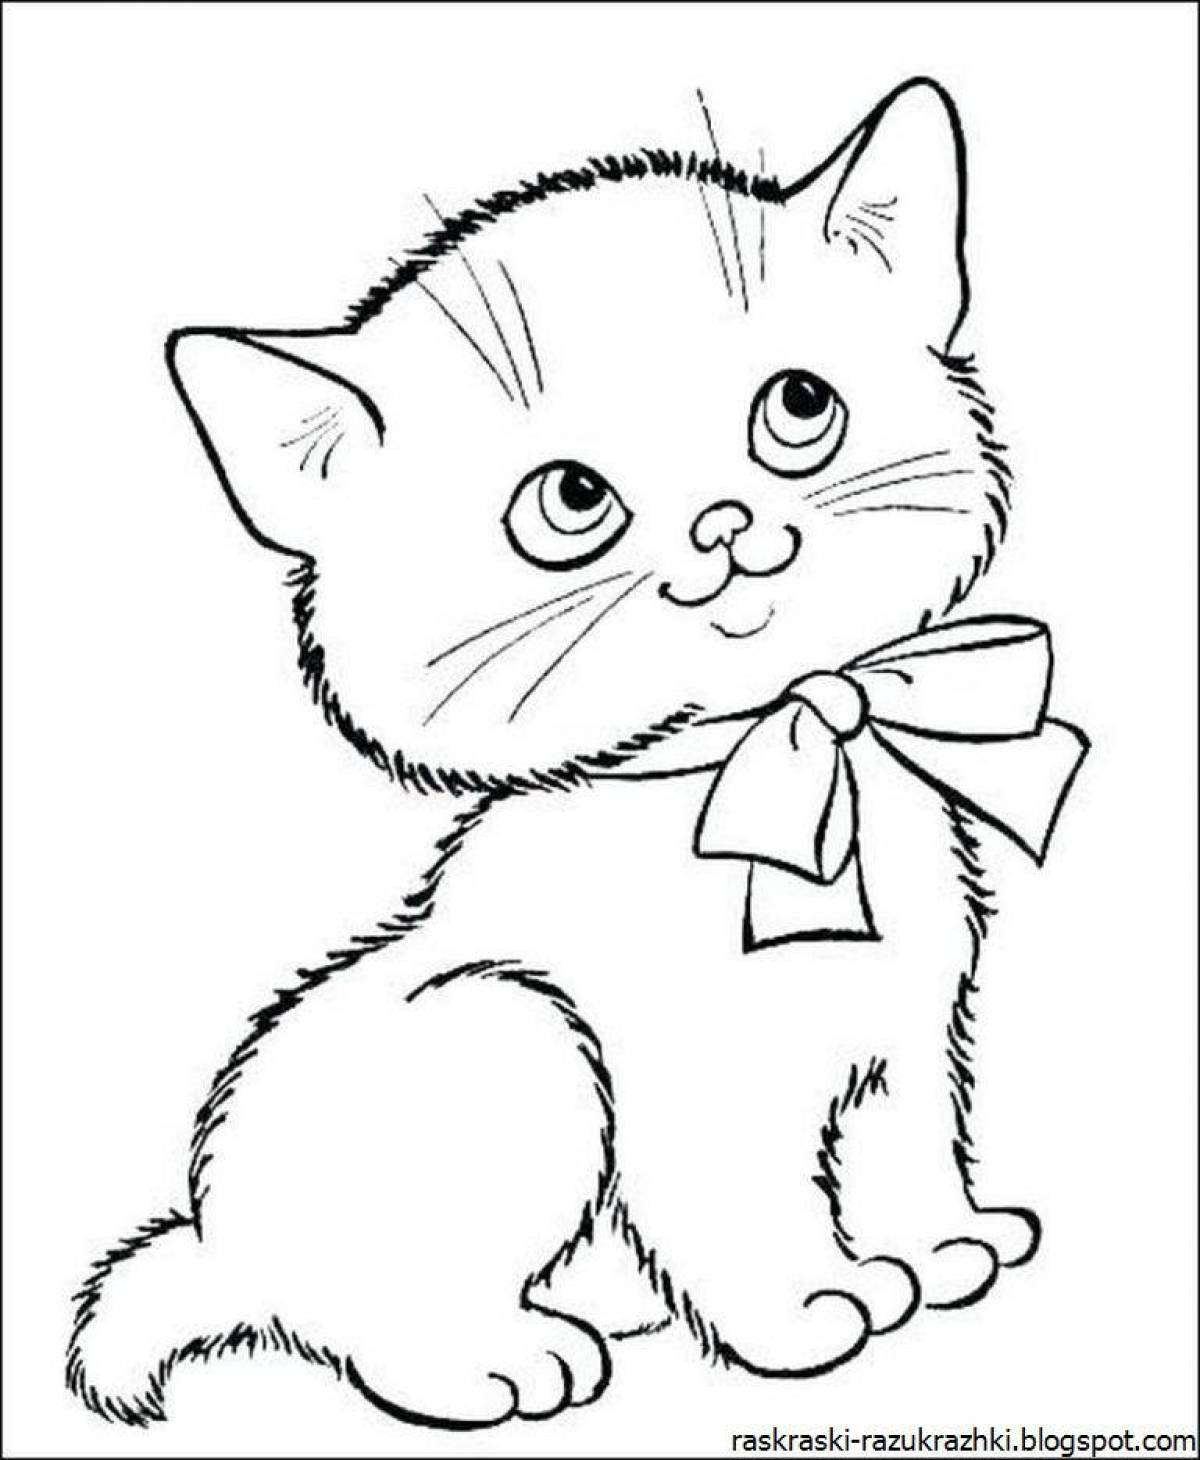 Bright cat coloring for kids